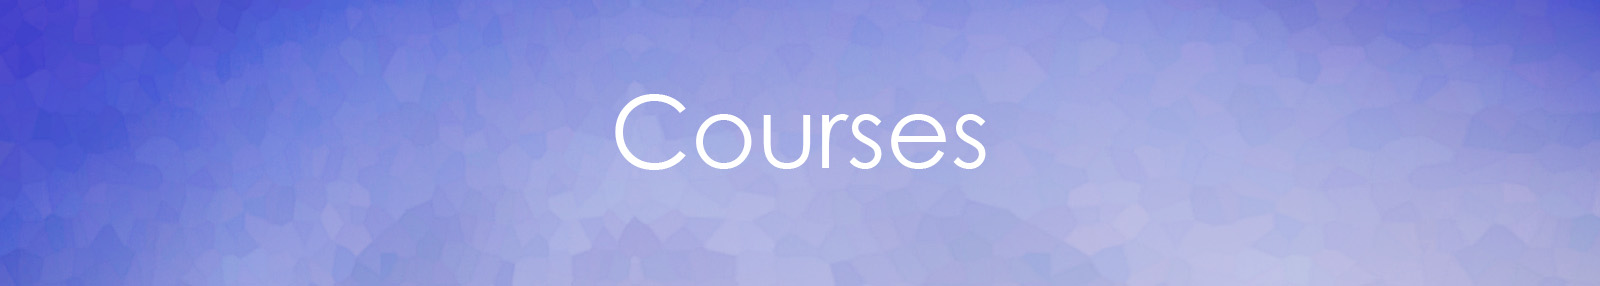 header_image_courses